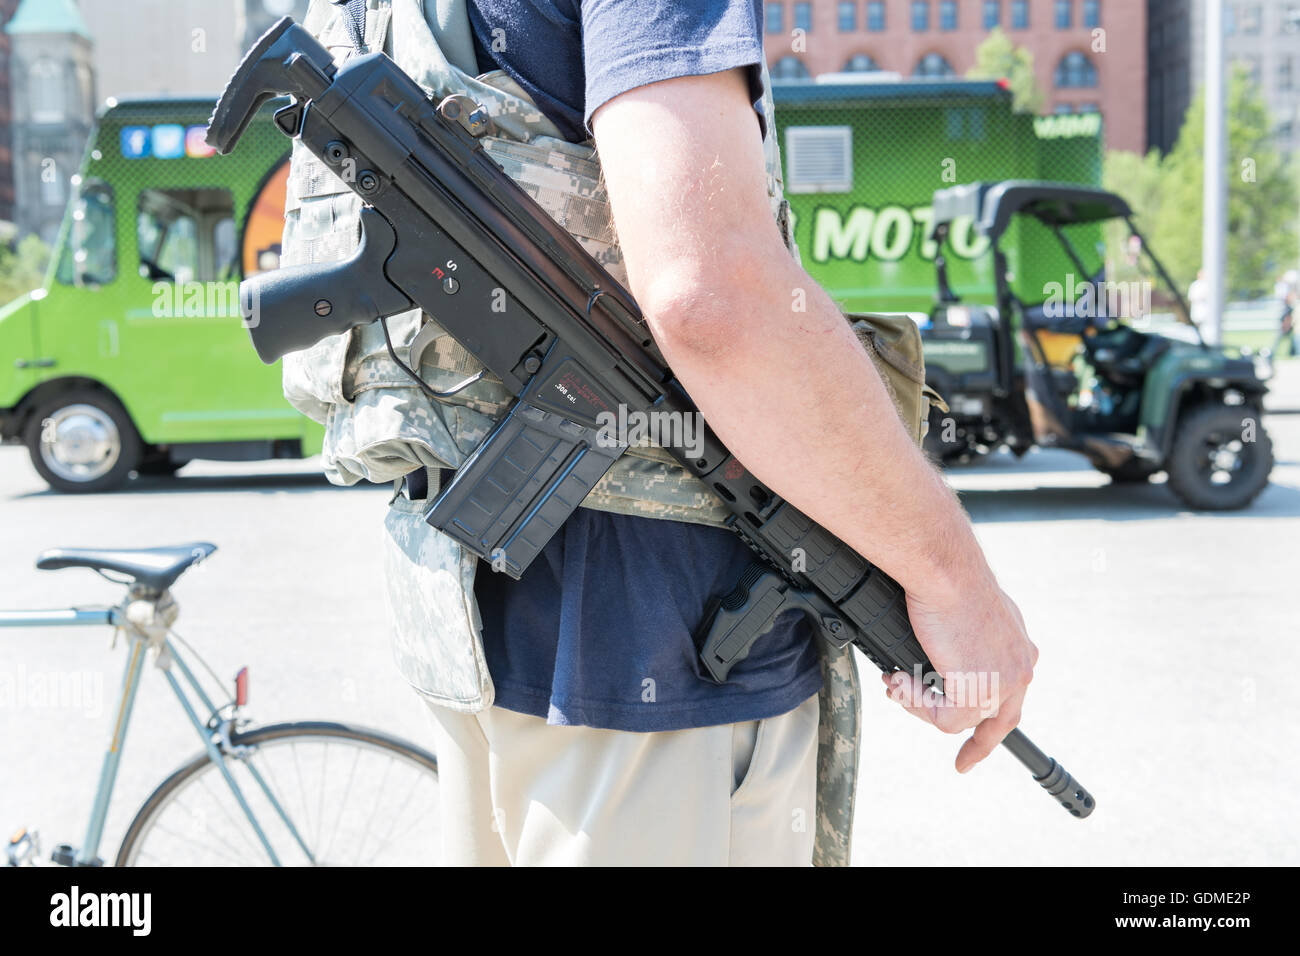 Cleveland, Ohio, USA. 19th July, 2016. Members of an Ohio militia group protest by openly carrying military style semi-automatic weapons downtown near the Republican National Convention July 19, 2016 in Cleveland, Ohio. Credit:  Planetpix/Alamy Live News Stock Photo